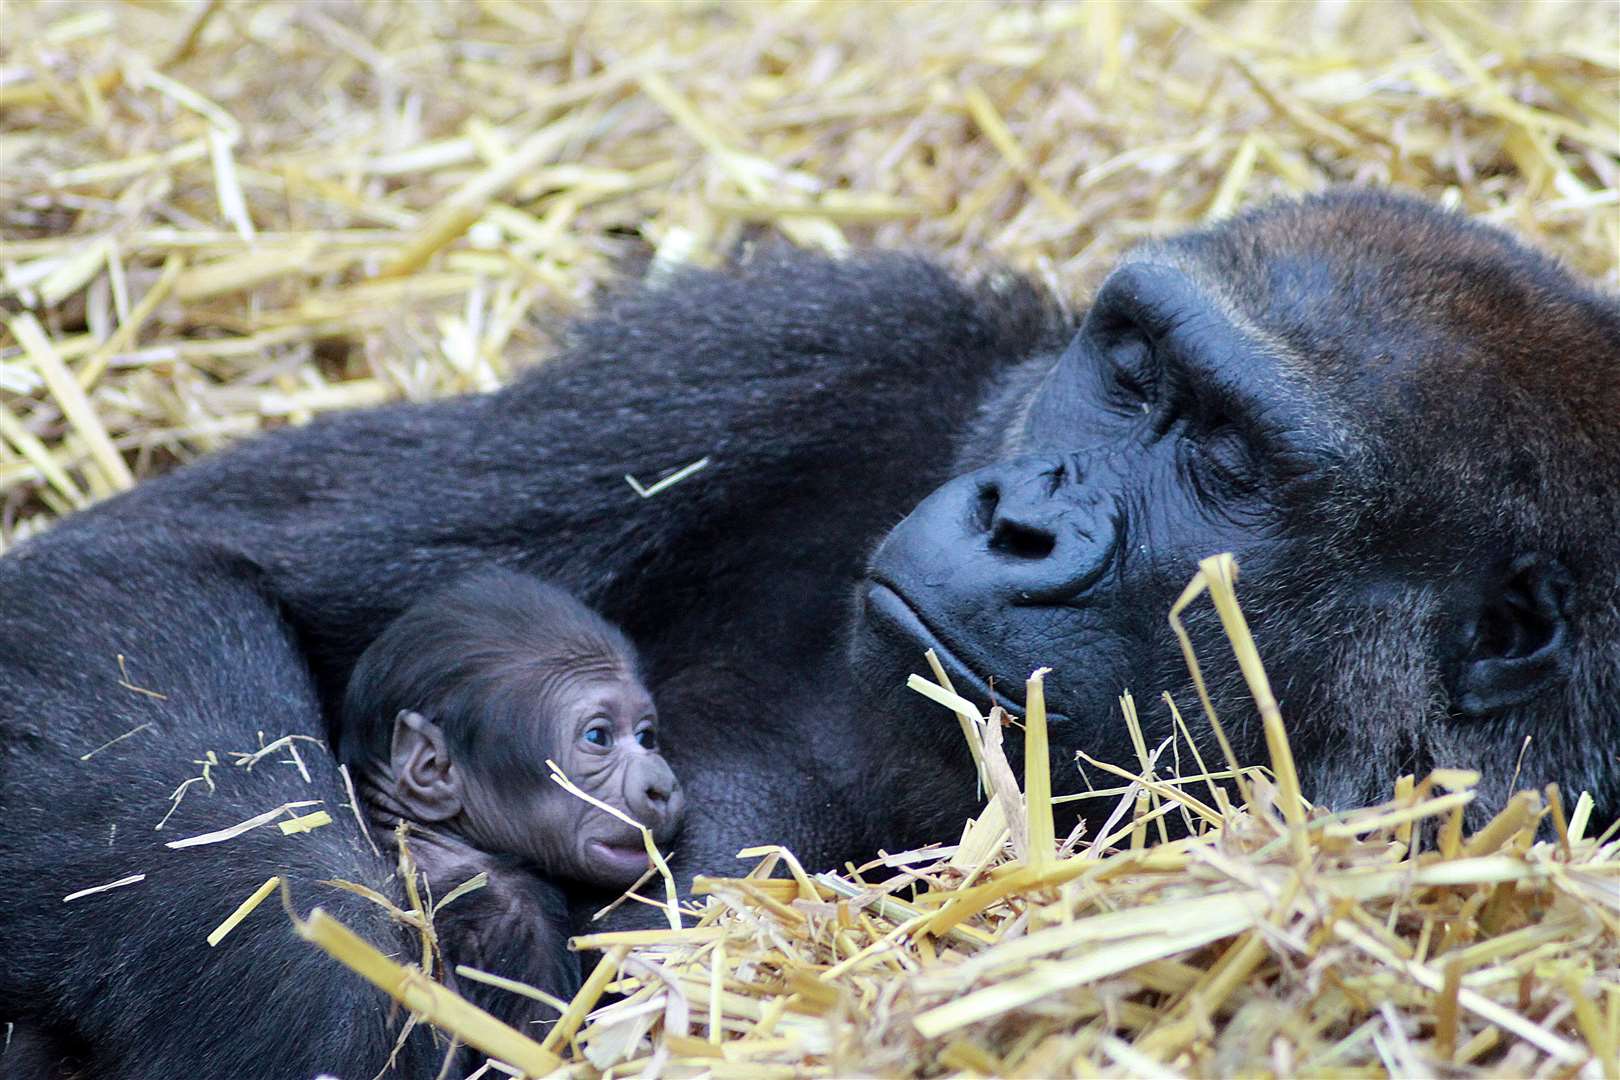 This baby gorilla was born to first time mum Viringika at Port Lympne this month. Photo credit: Leanne Smith